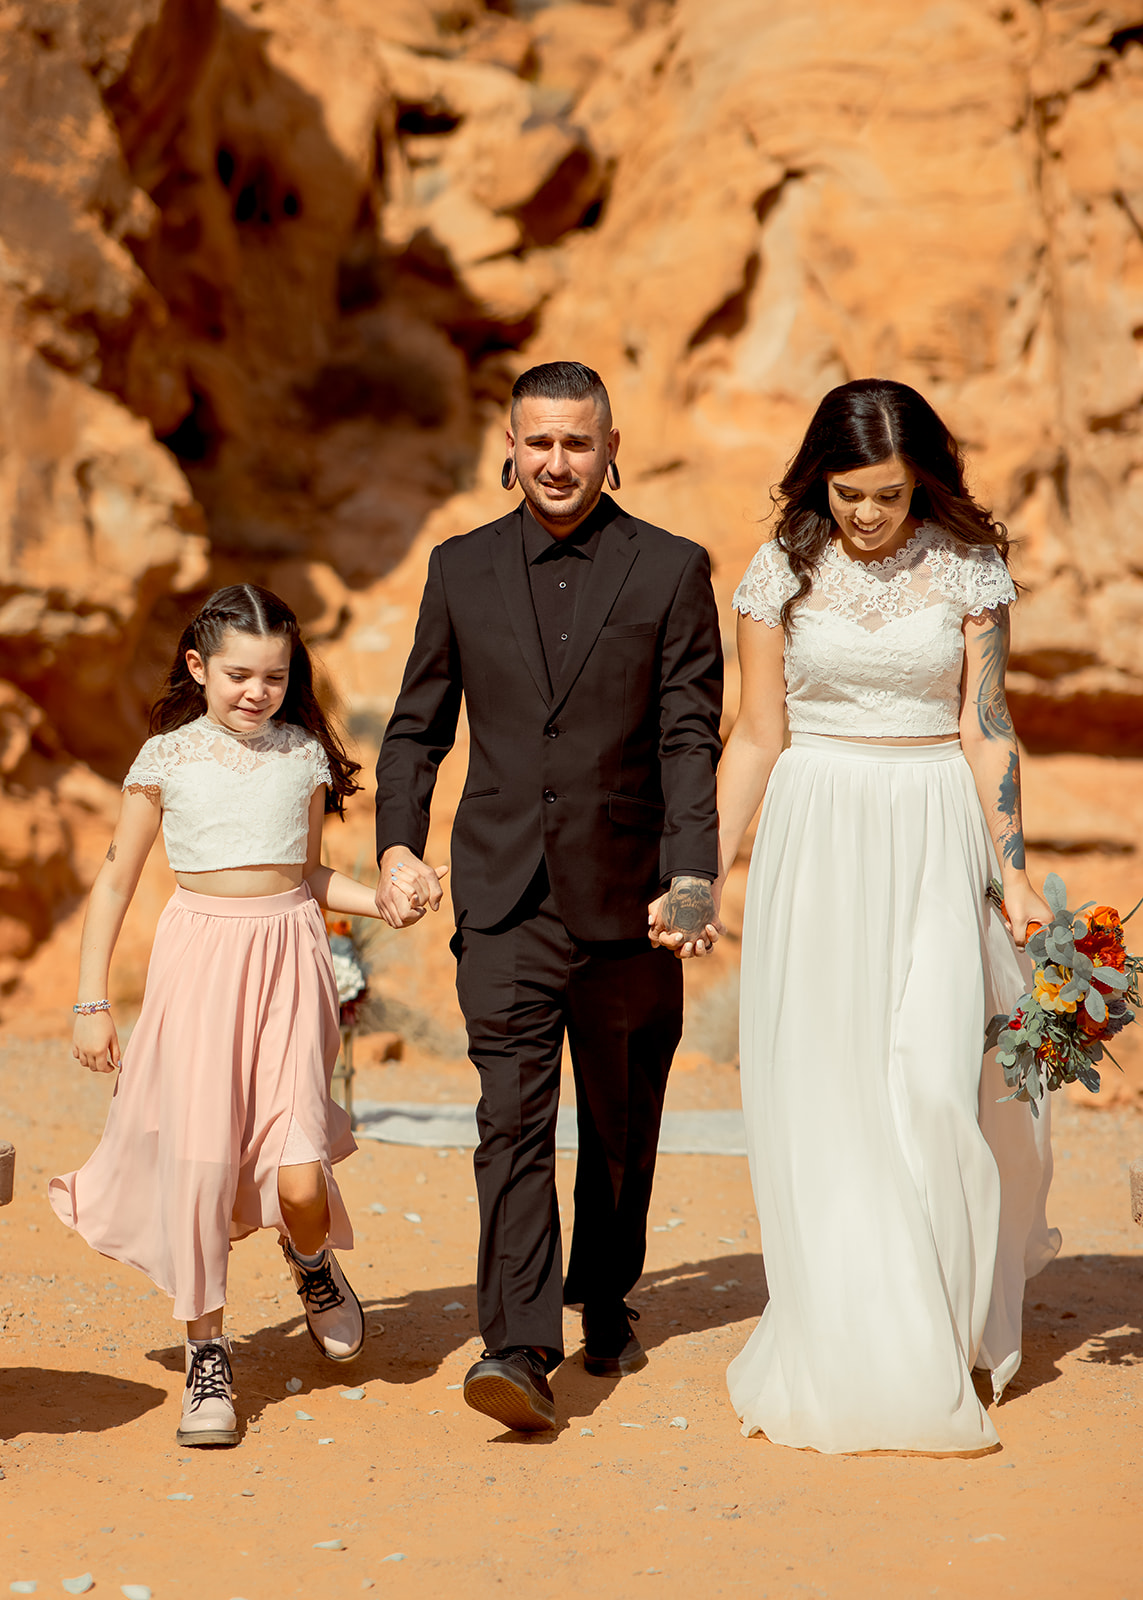 Groom in all black and bride in two piece wedding dress exits ceremony with Daughter at Valley of Fire Rock N Roll Wedding